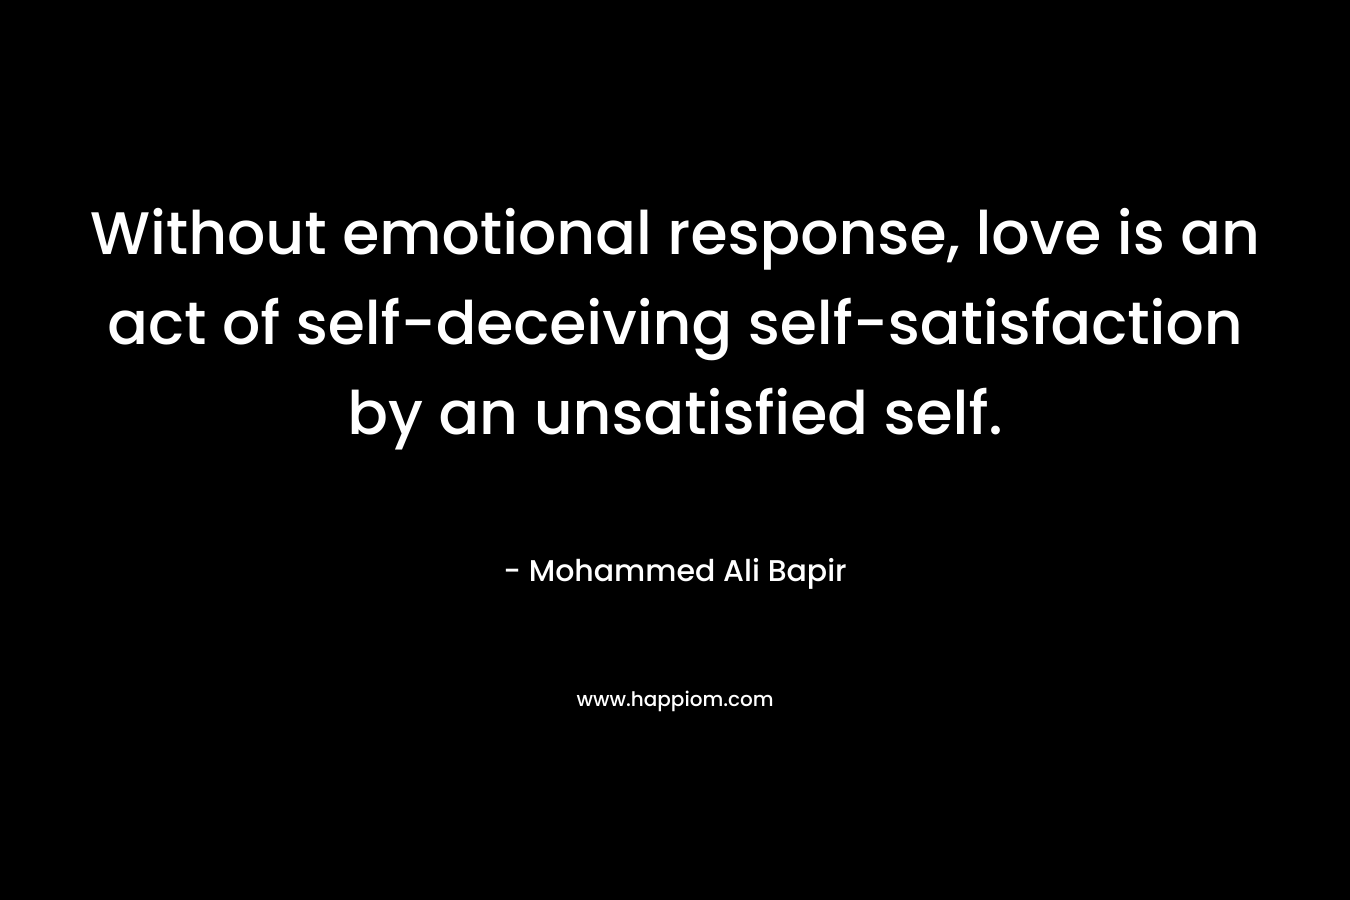 Without emotional response, love is an act of self-deceiving self-satisfaction by an unsatisfied self. – Mohammed Ali Bapir